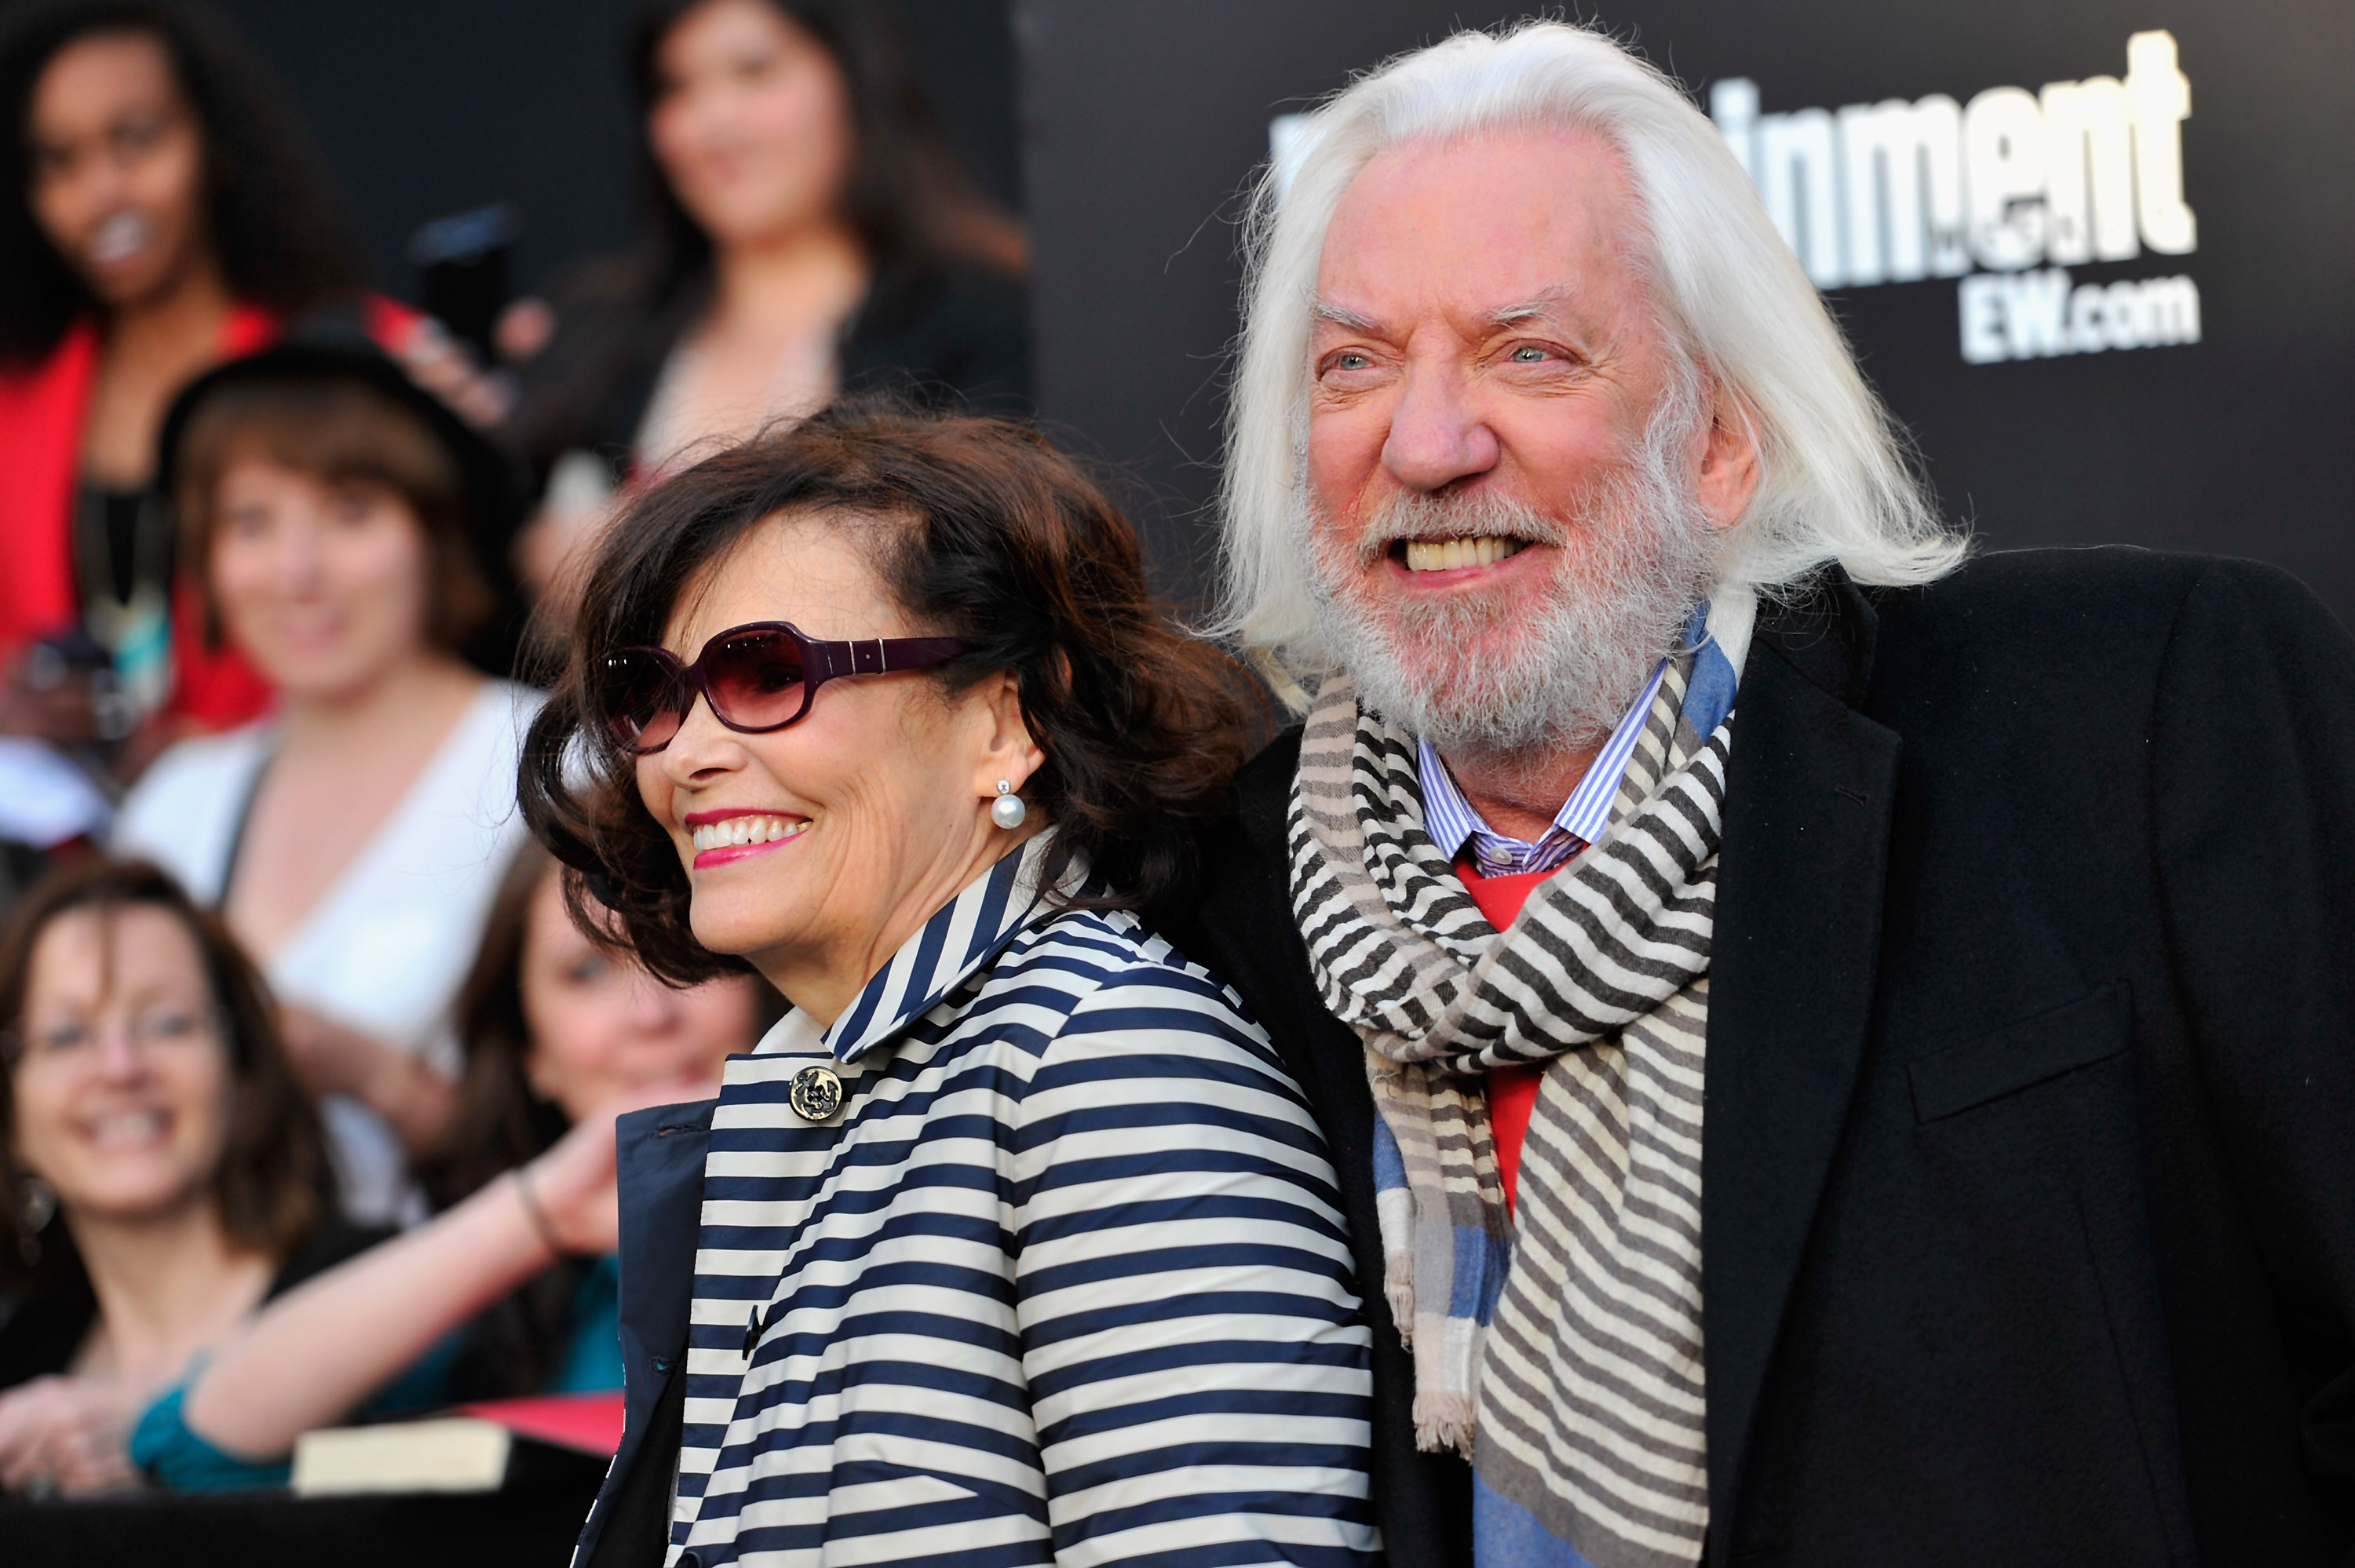 Francine Racette and Donald Sutherland at the premiere of The Hunger Games at the Nokia Theatre on March 12, 2012, in Los Angeles, California